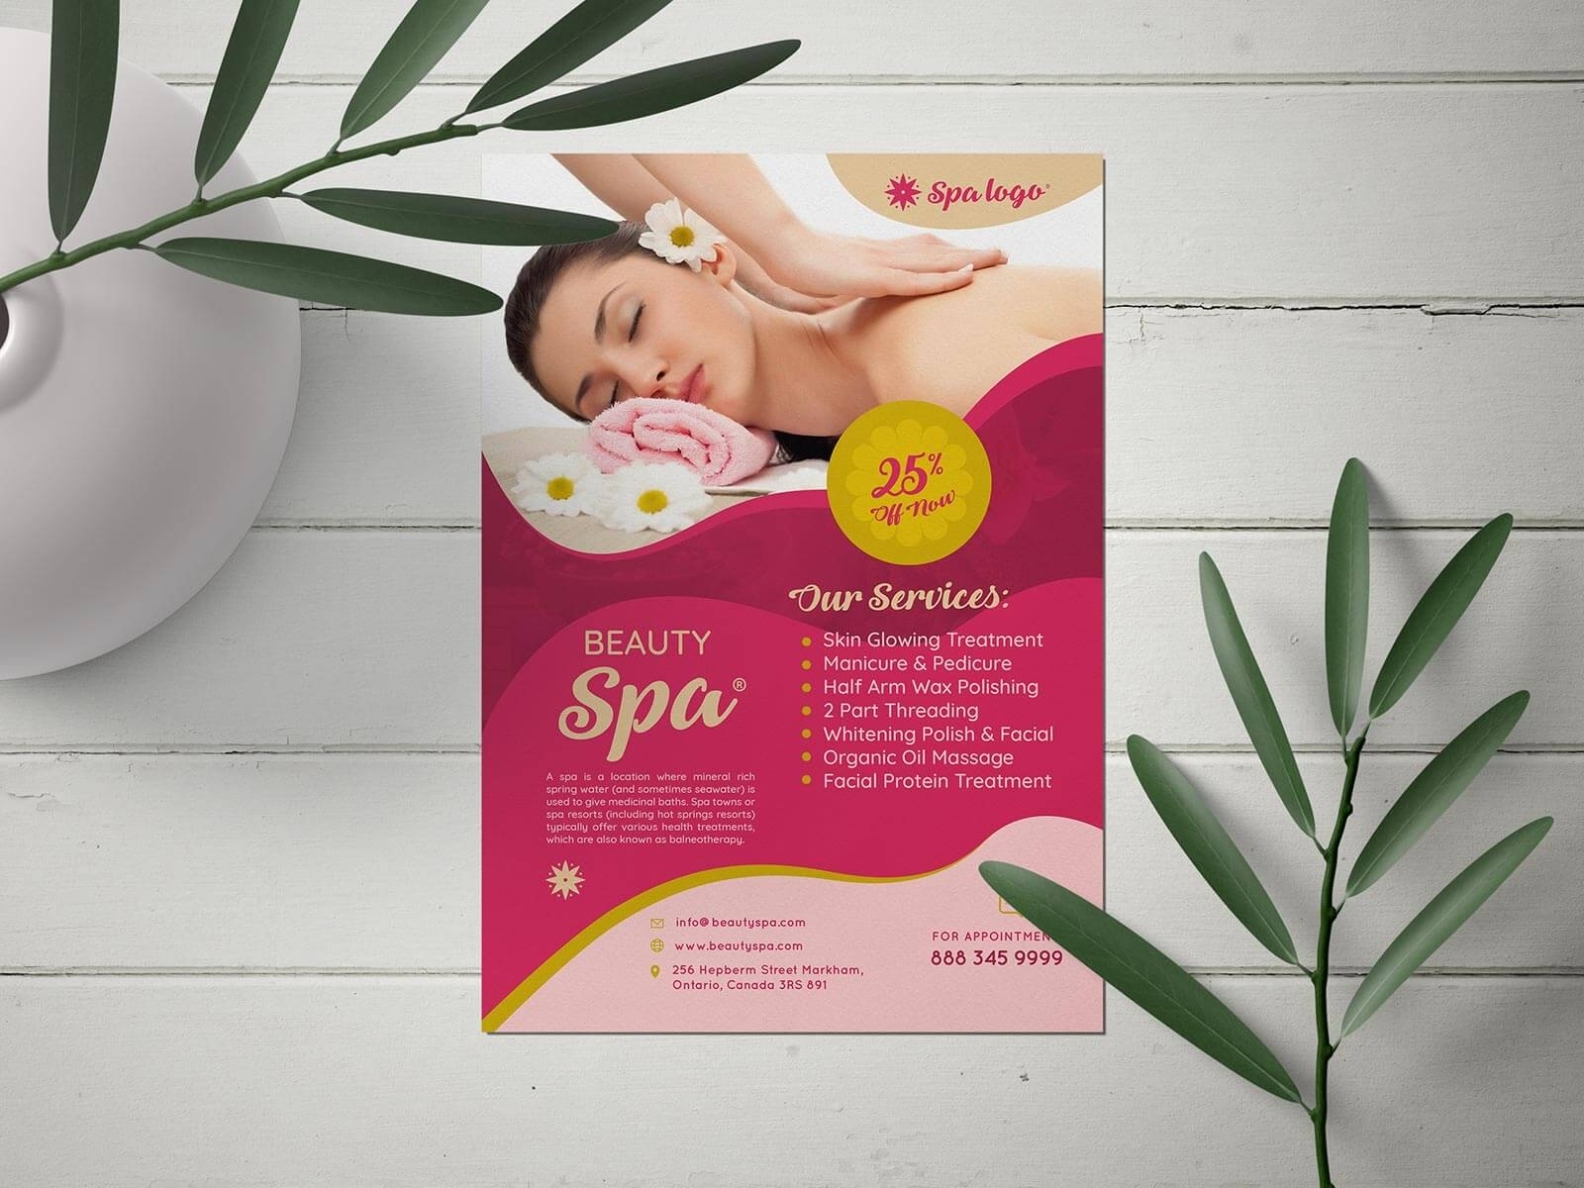 Free Spa Flyer Design Template In Psd Format - Designbolts Throughout Salon Flyers Template Free